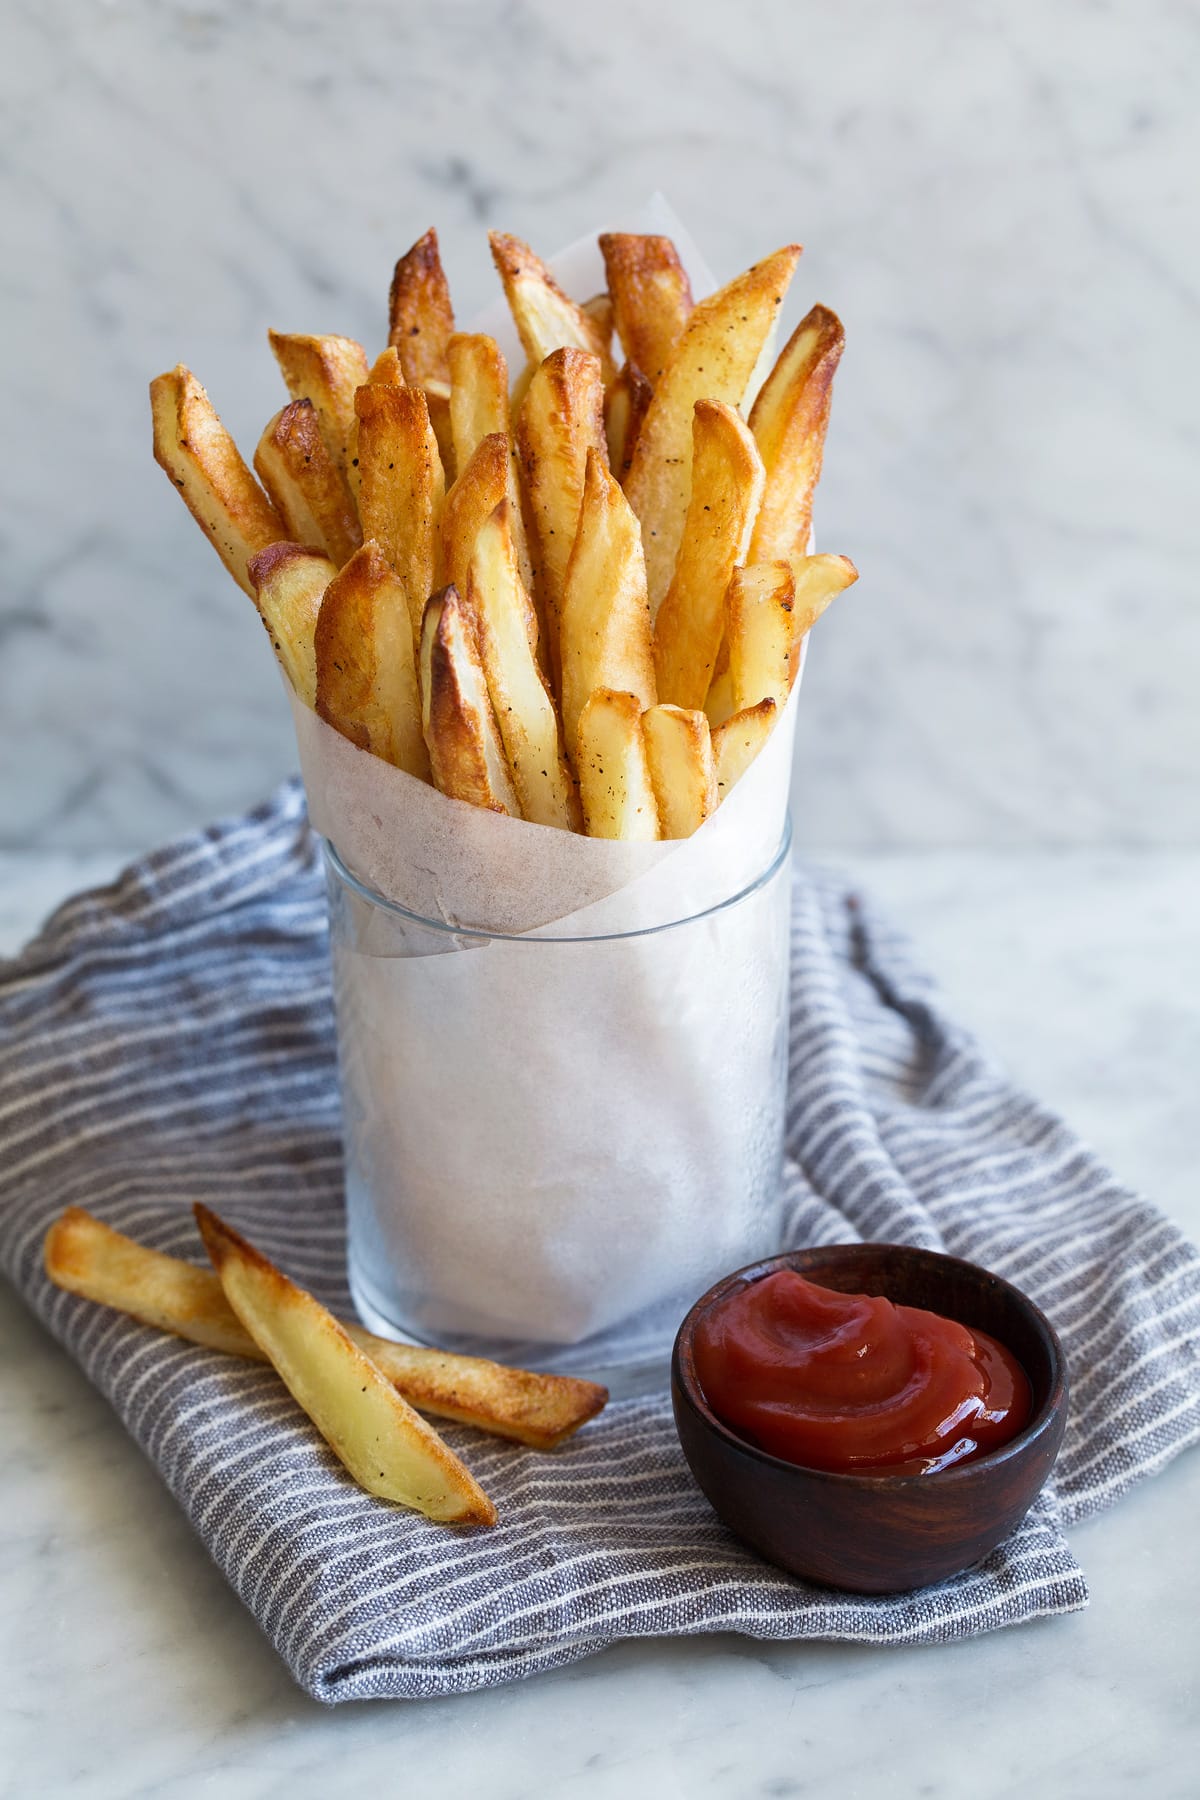 Cup full of french fries in parchment paper with a side of ketchup.